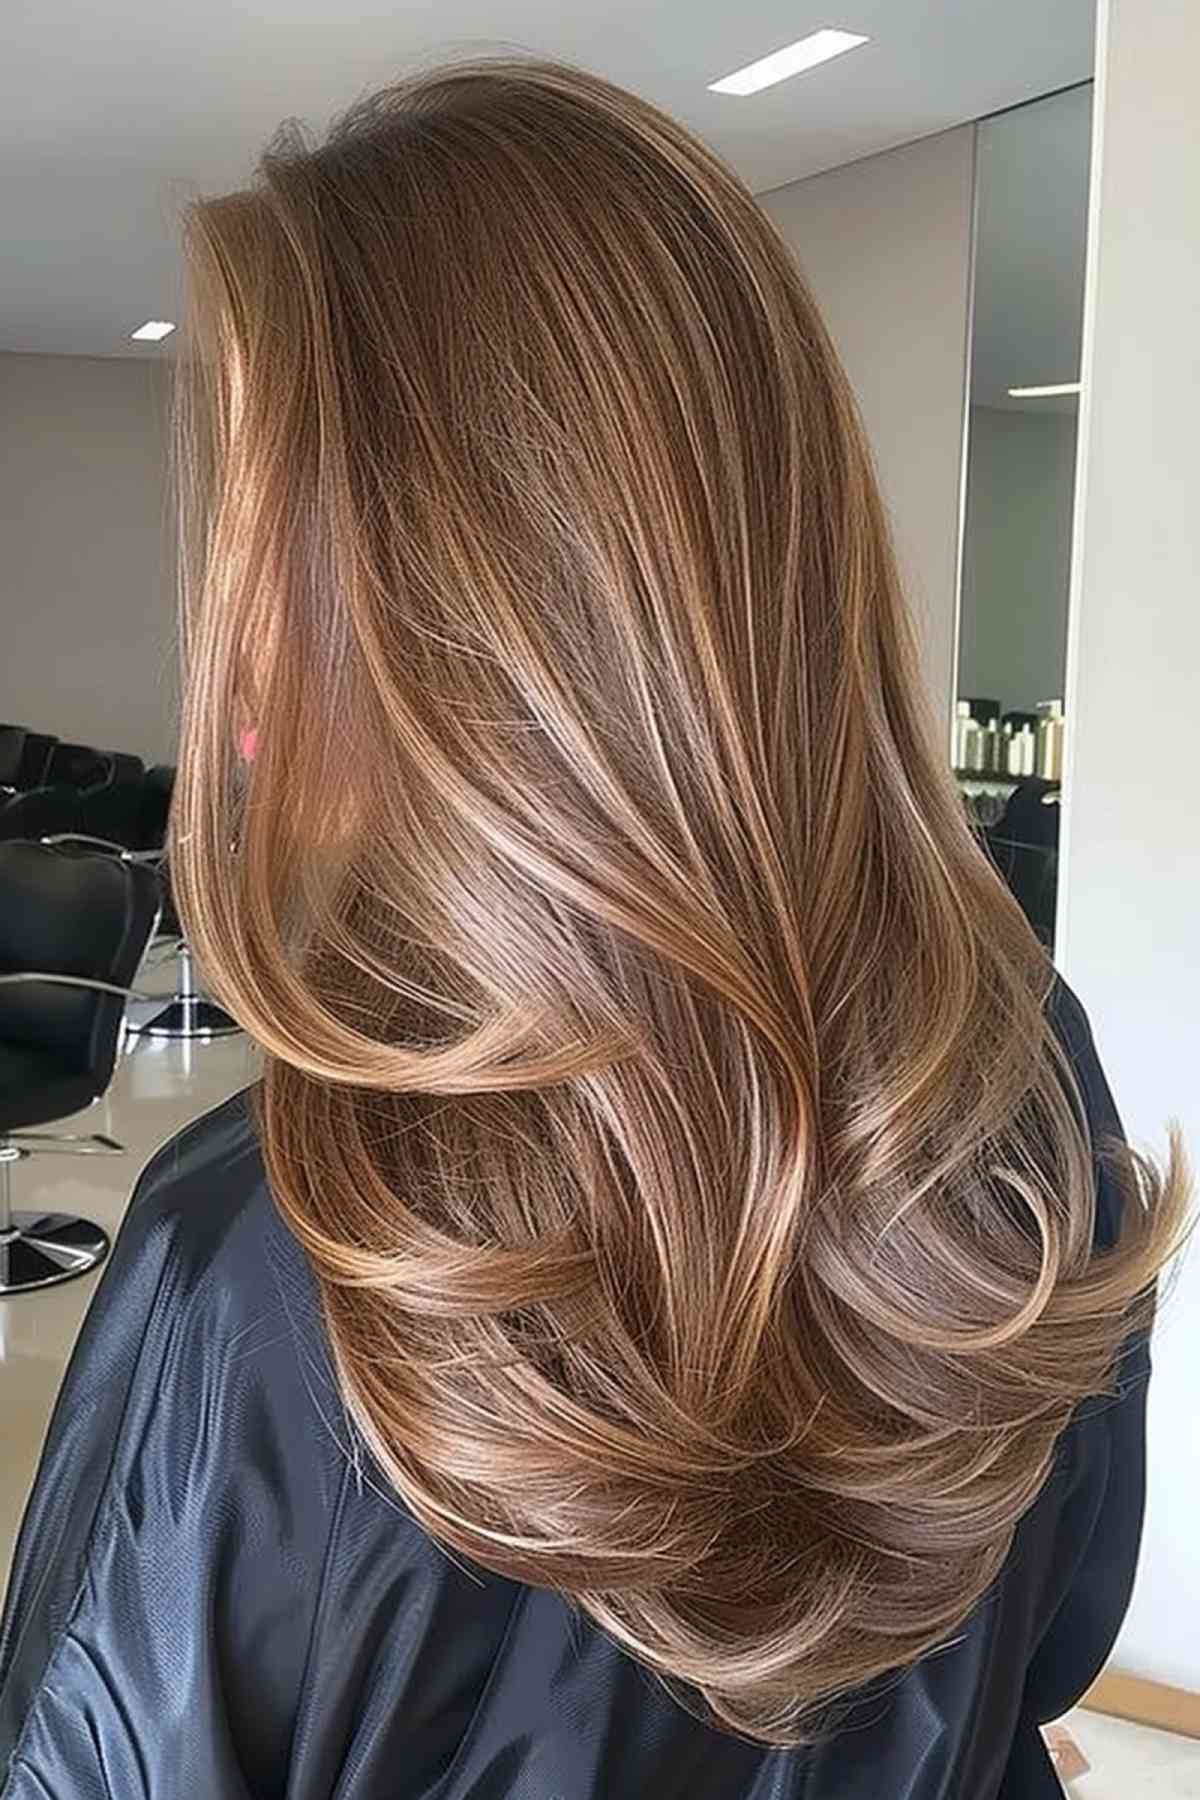 Long chestnut hair with honey-blonde balayage highlights, showcasing dimensional color and depth